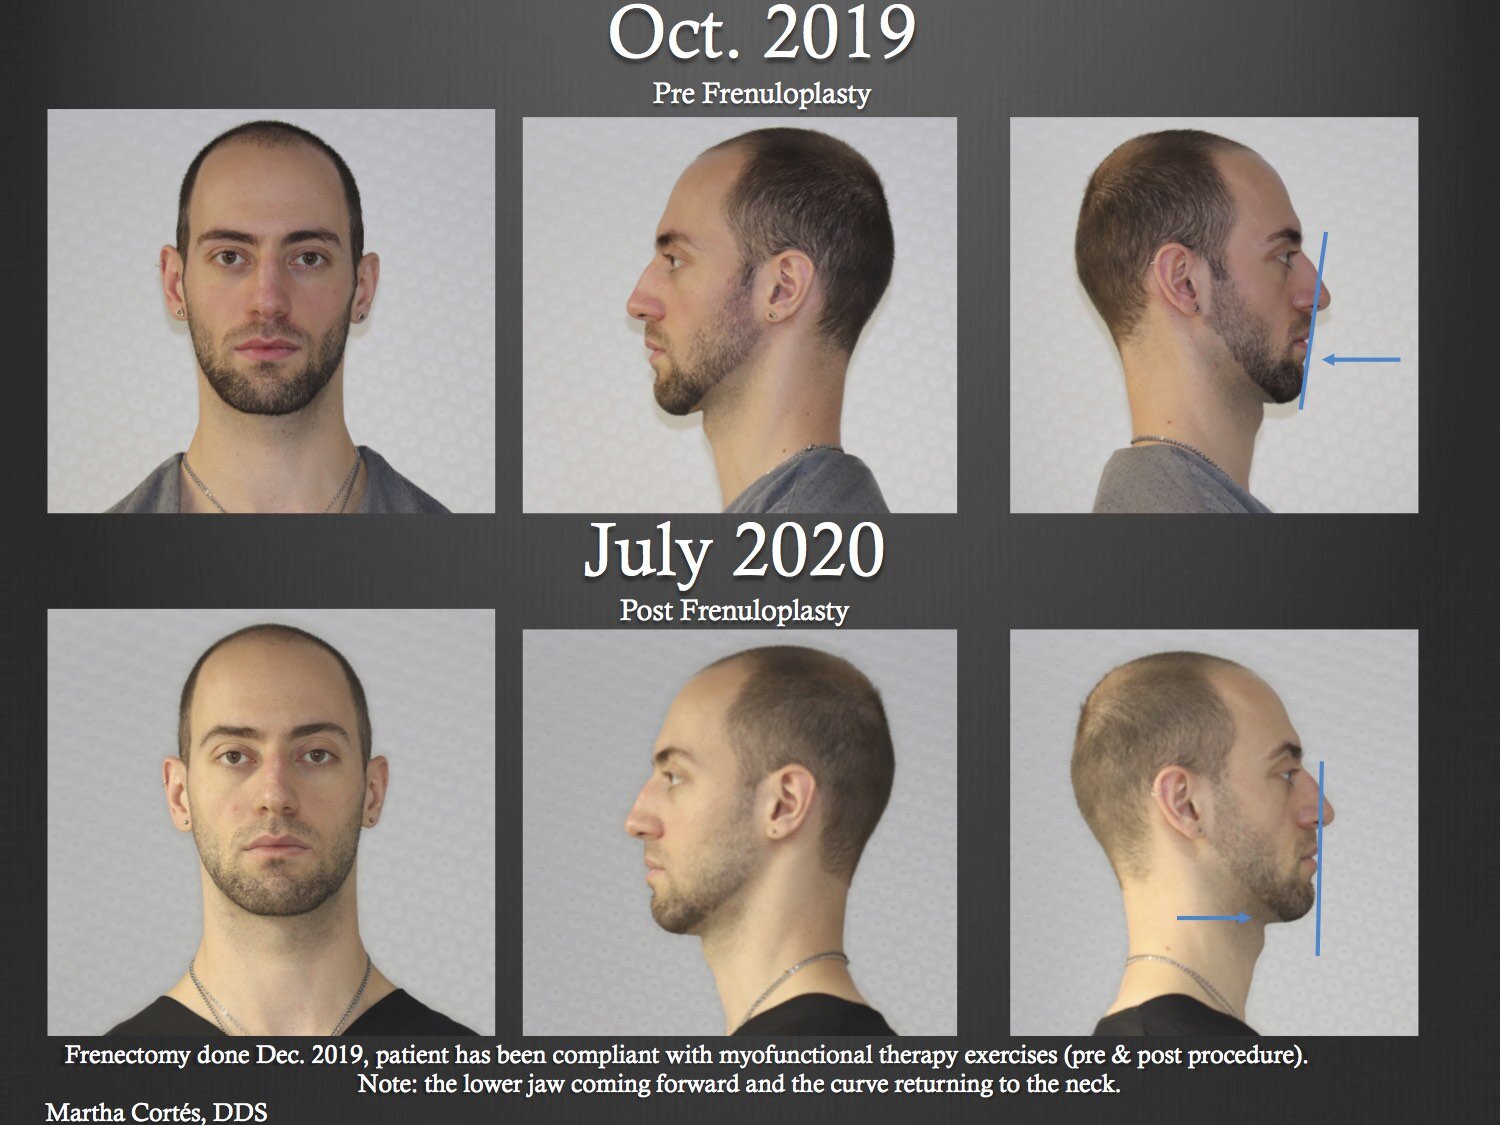  Case 2 Pre and Post tongue tie release diagnostic facial photos showing the changes that occurred in the face and lower jaw  